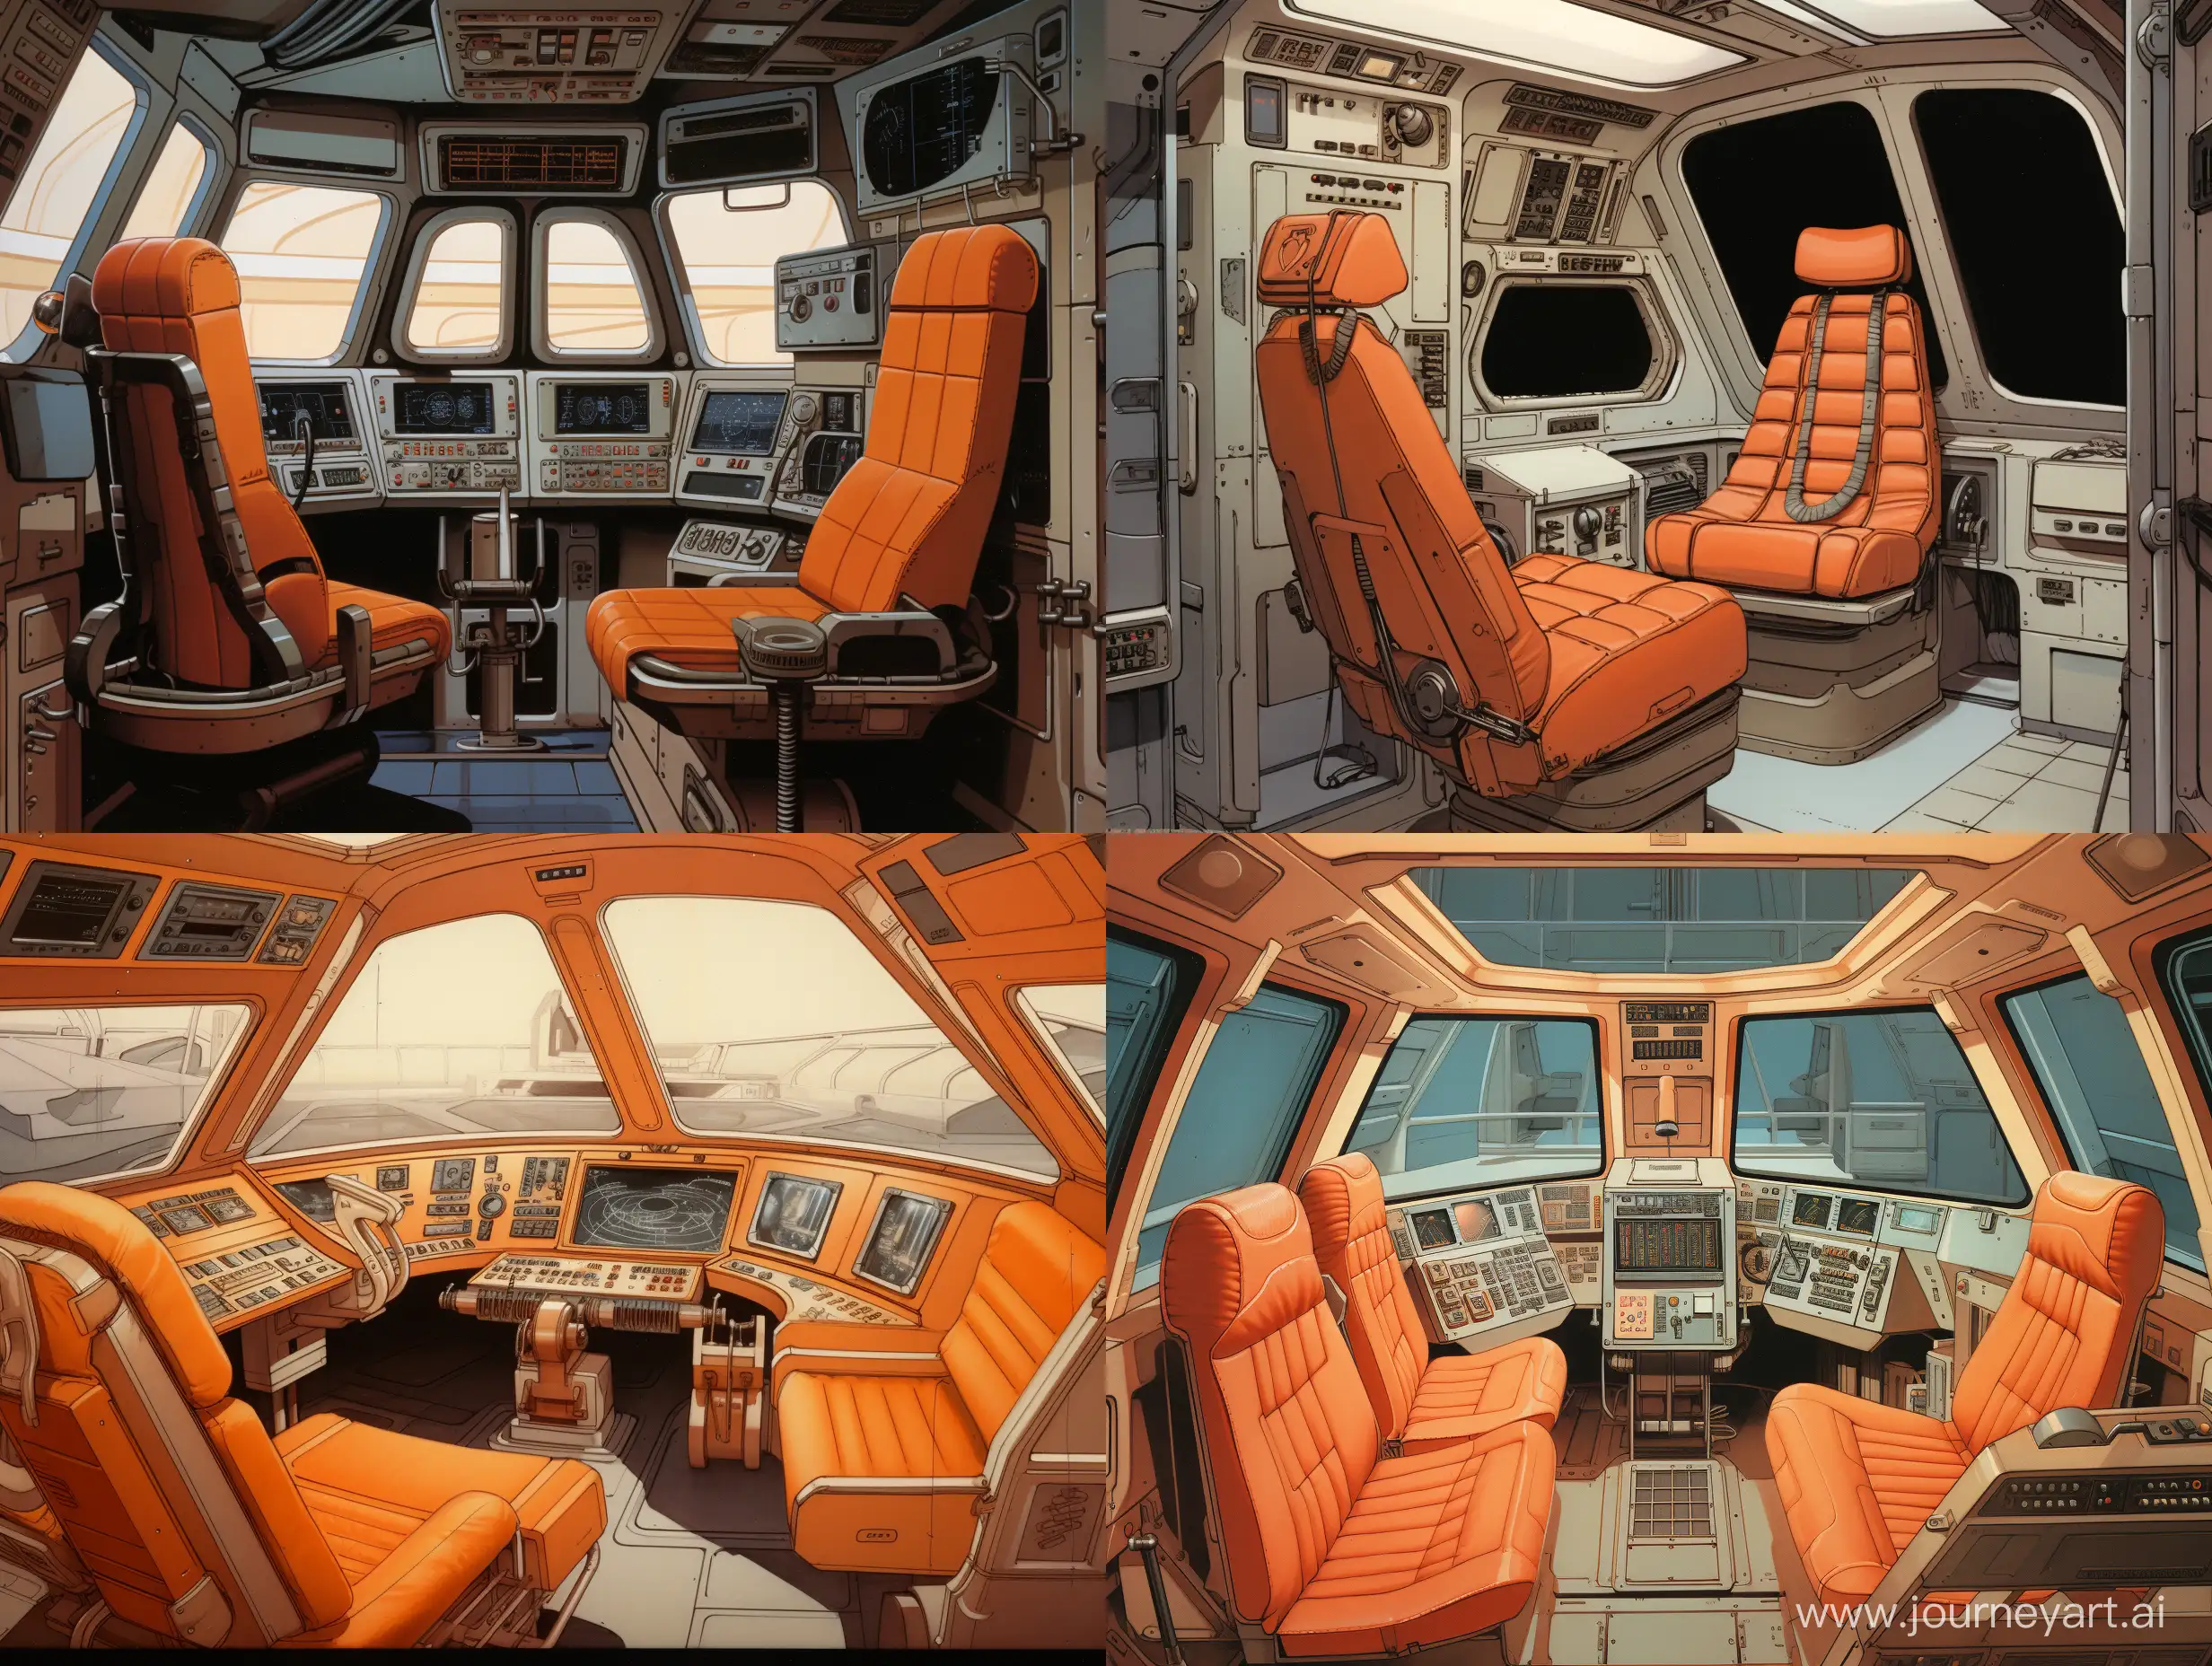 A concept art drawing of the cockpit of a science fiction ship drawn by ralph mcquarrie. 1977. Star wars. in color. 